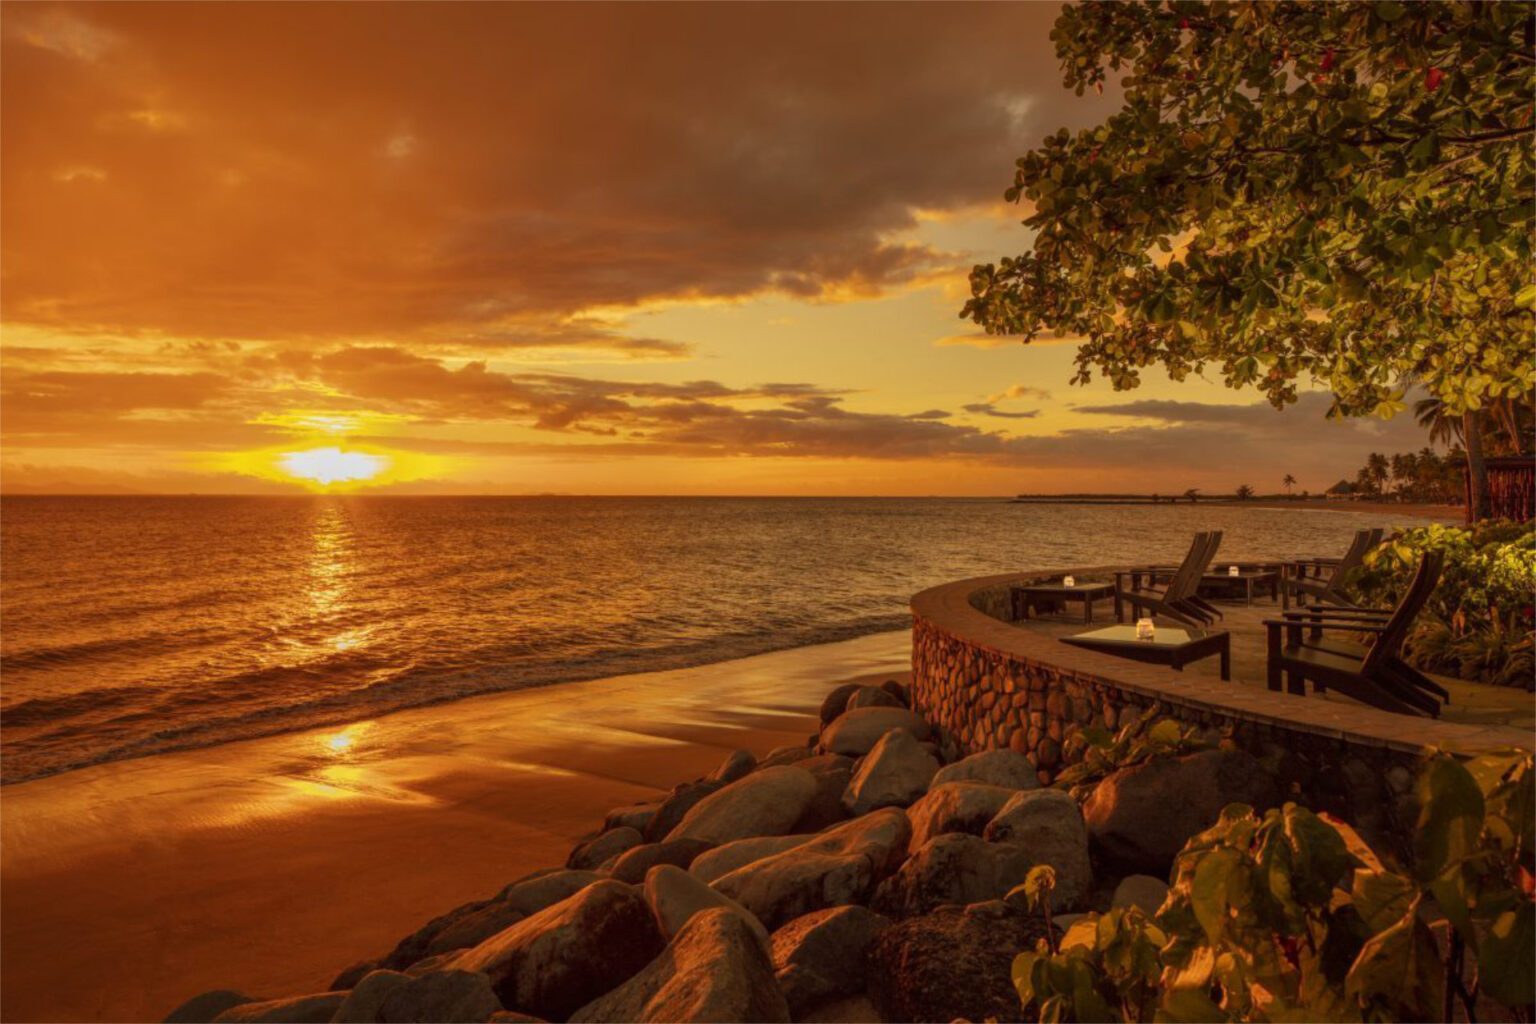 Radisson Blu Resort, a perfect resort destination for your girl's trip to Fiji - Luxury Escapes